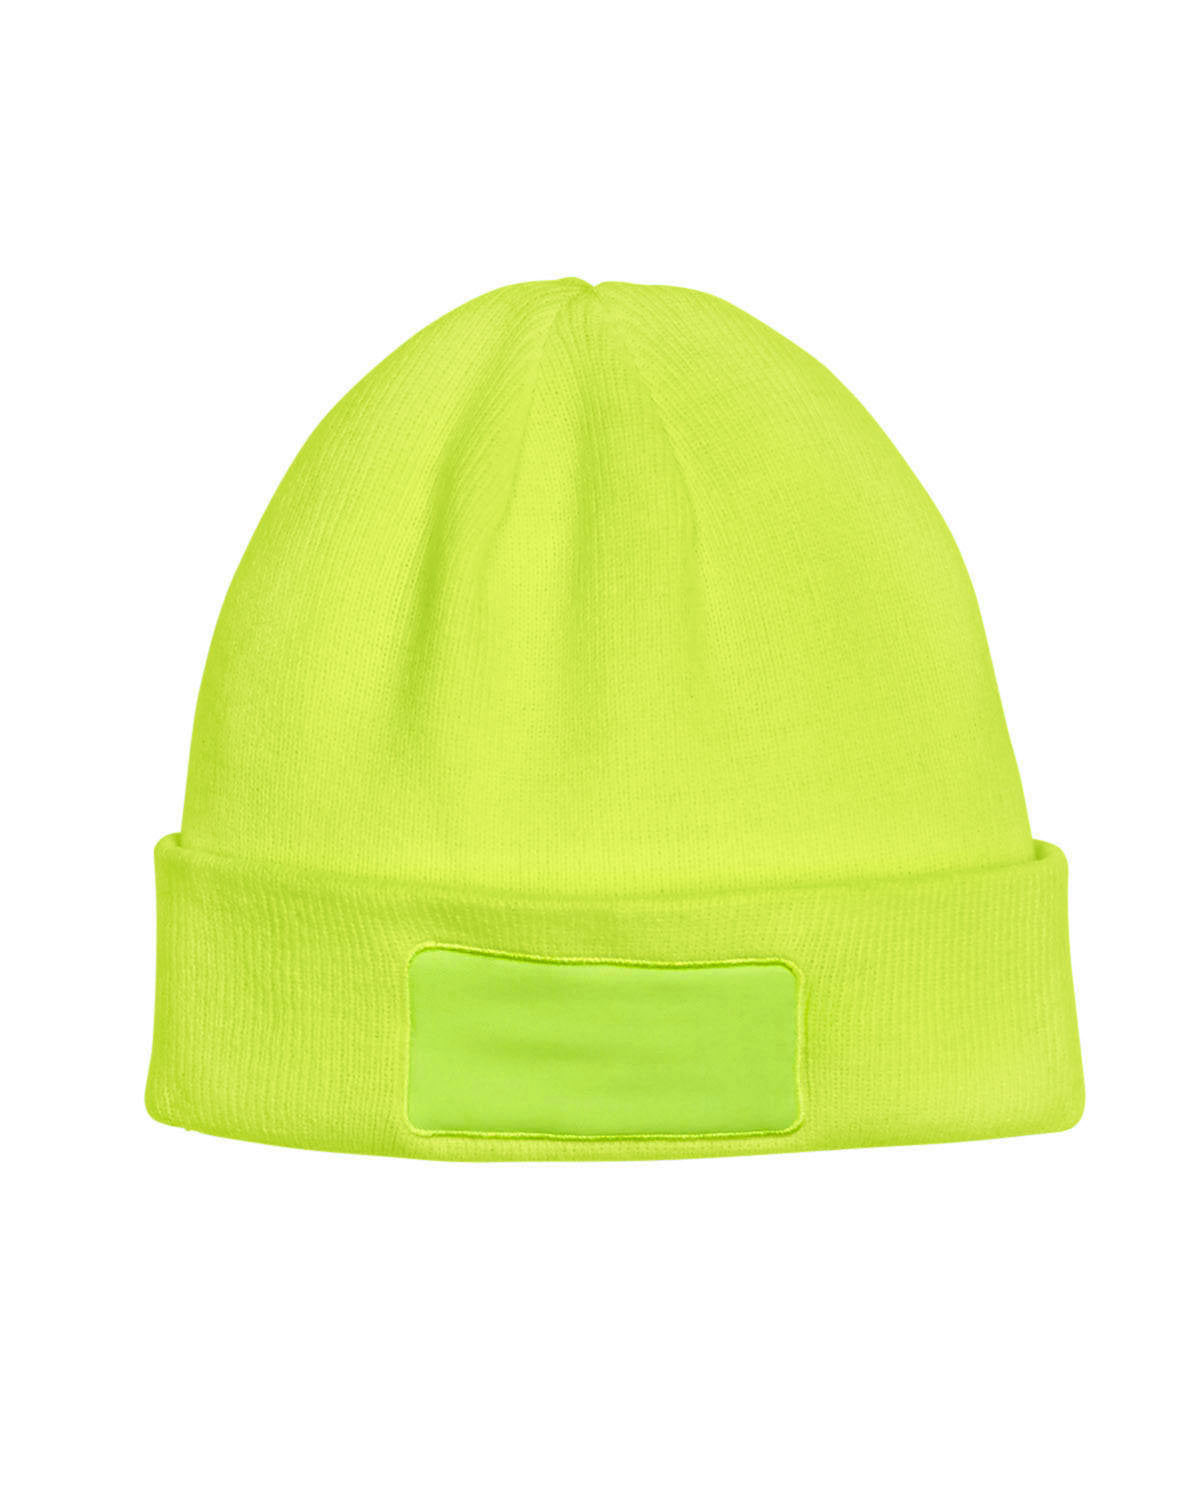 Neon Yellow, front view